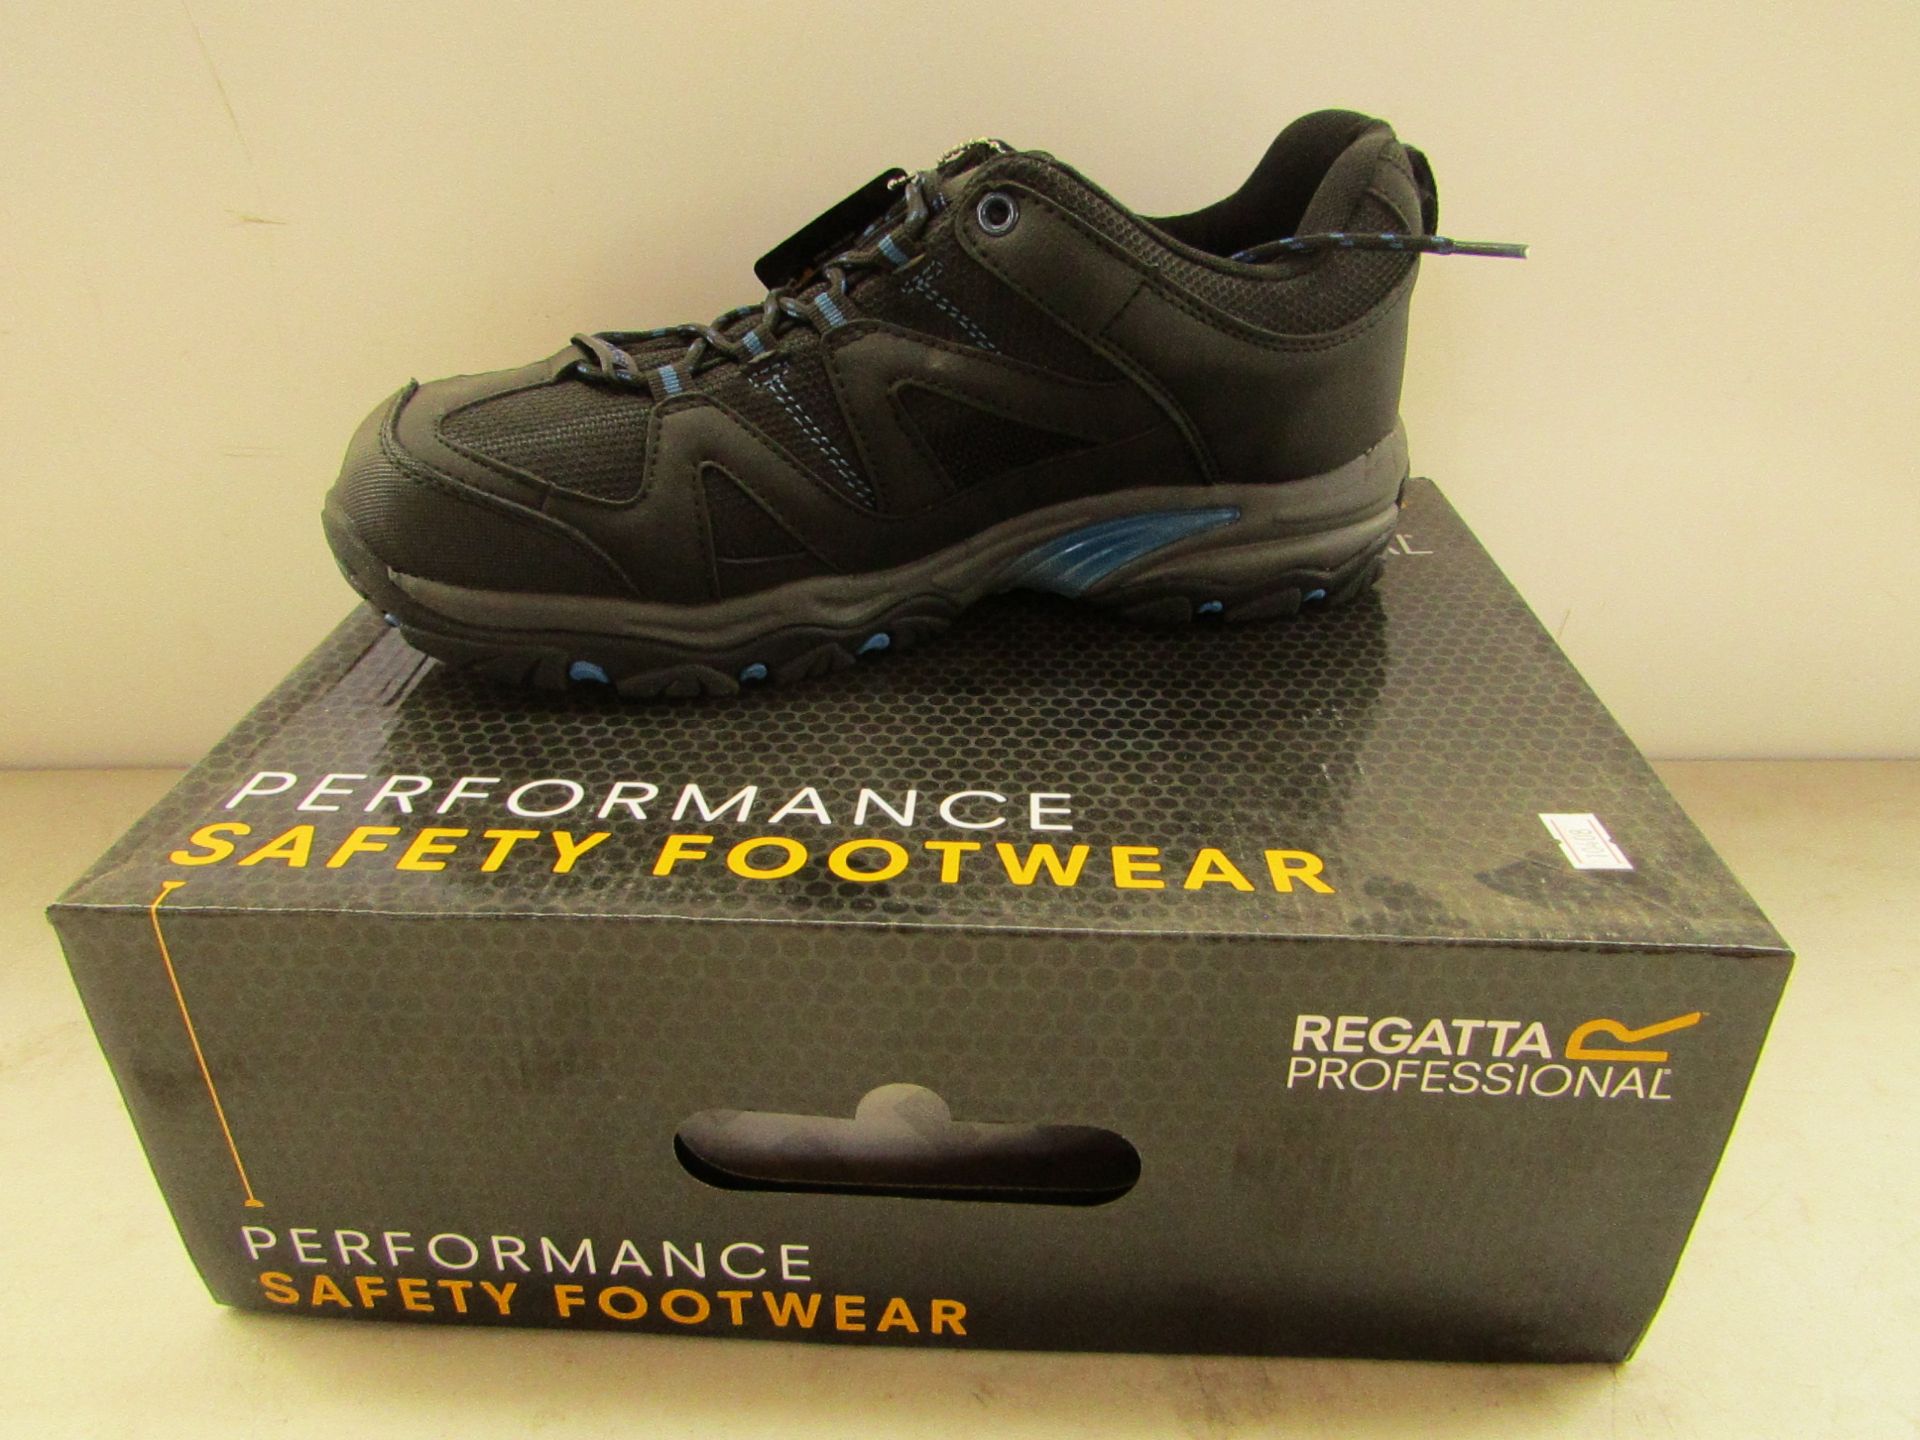 Regatta Professional Riverbeck steel toe cap safety trainers (Black and Blue colour), size UK8,